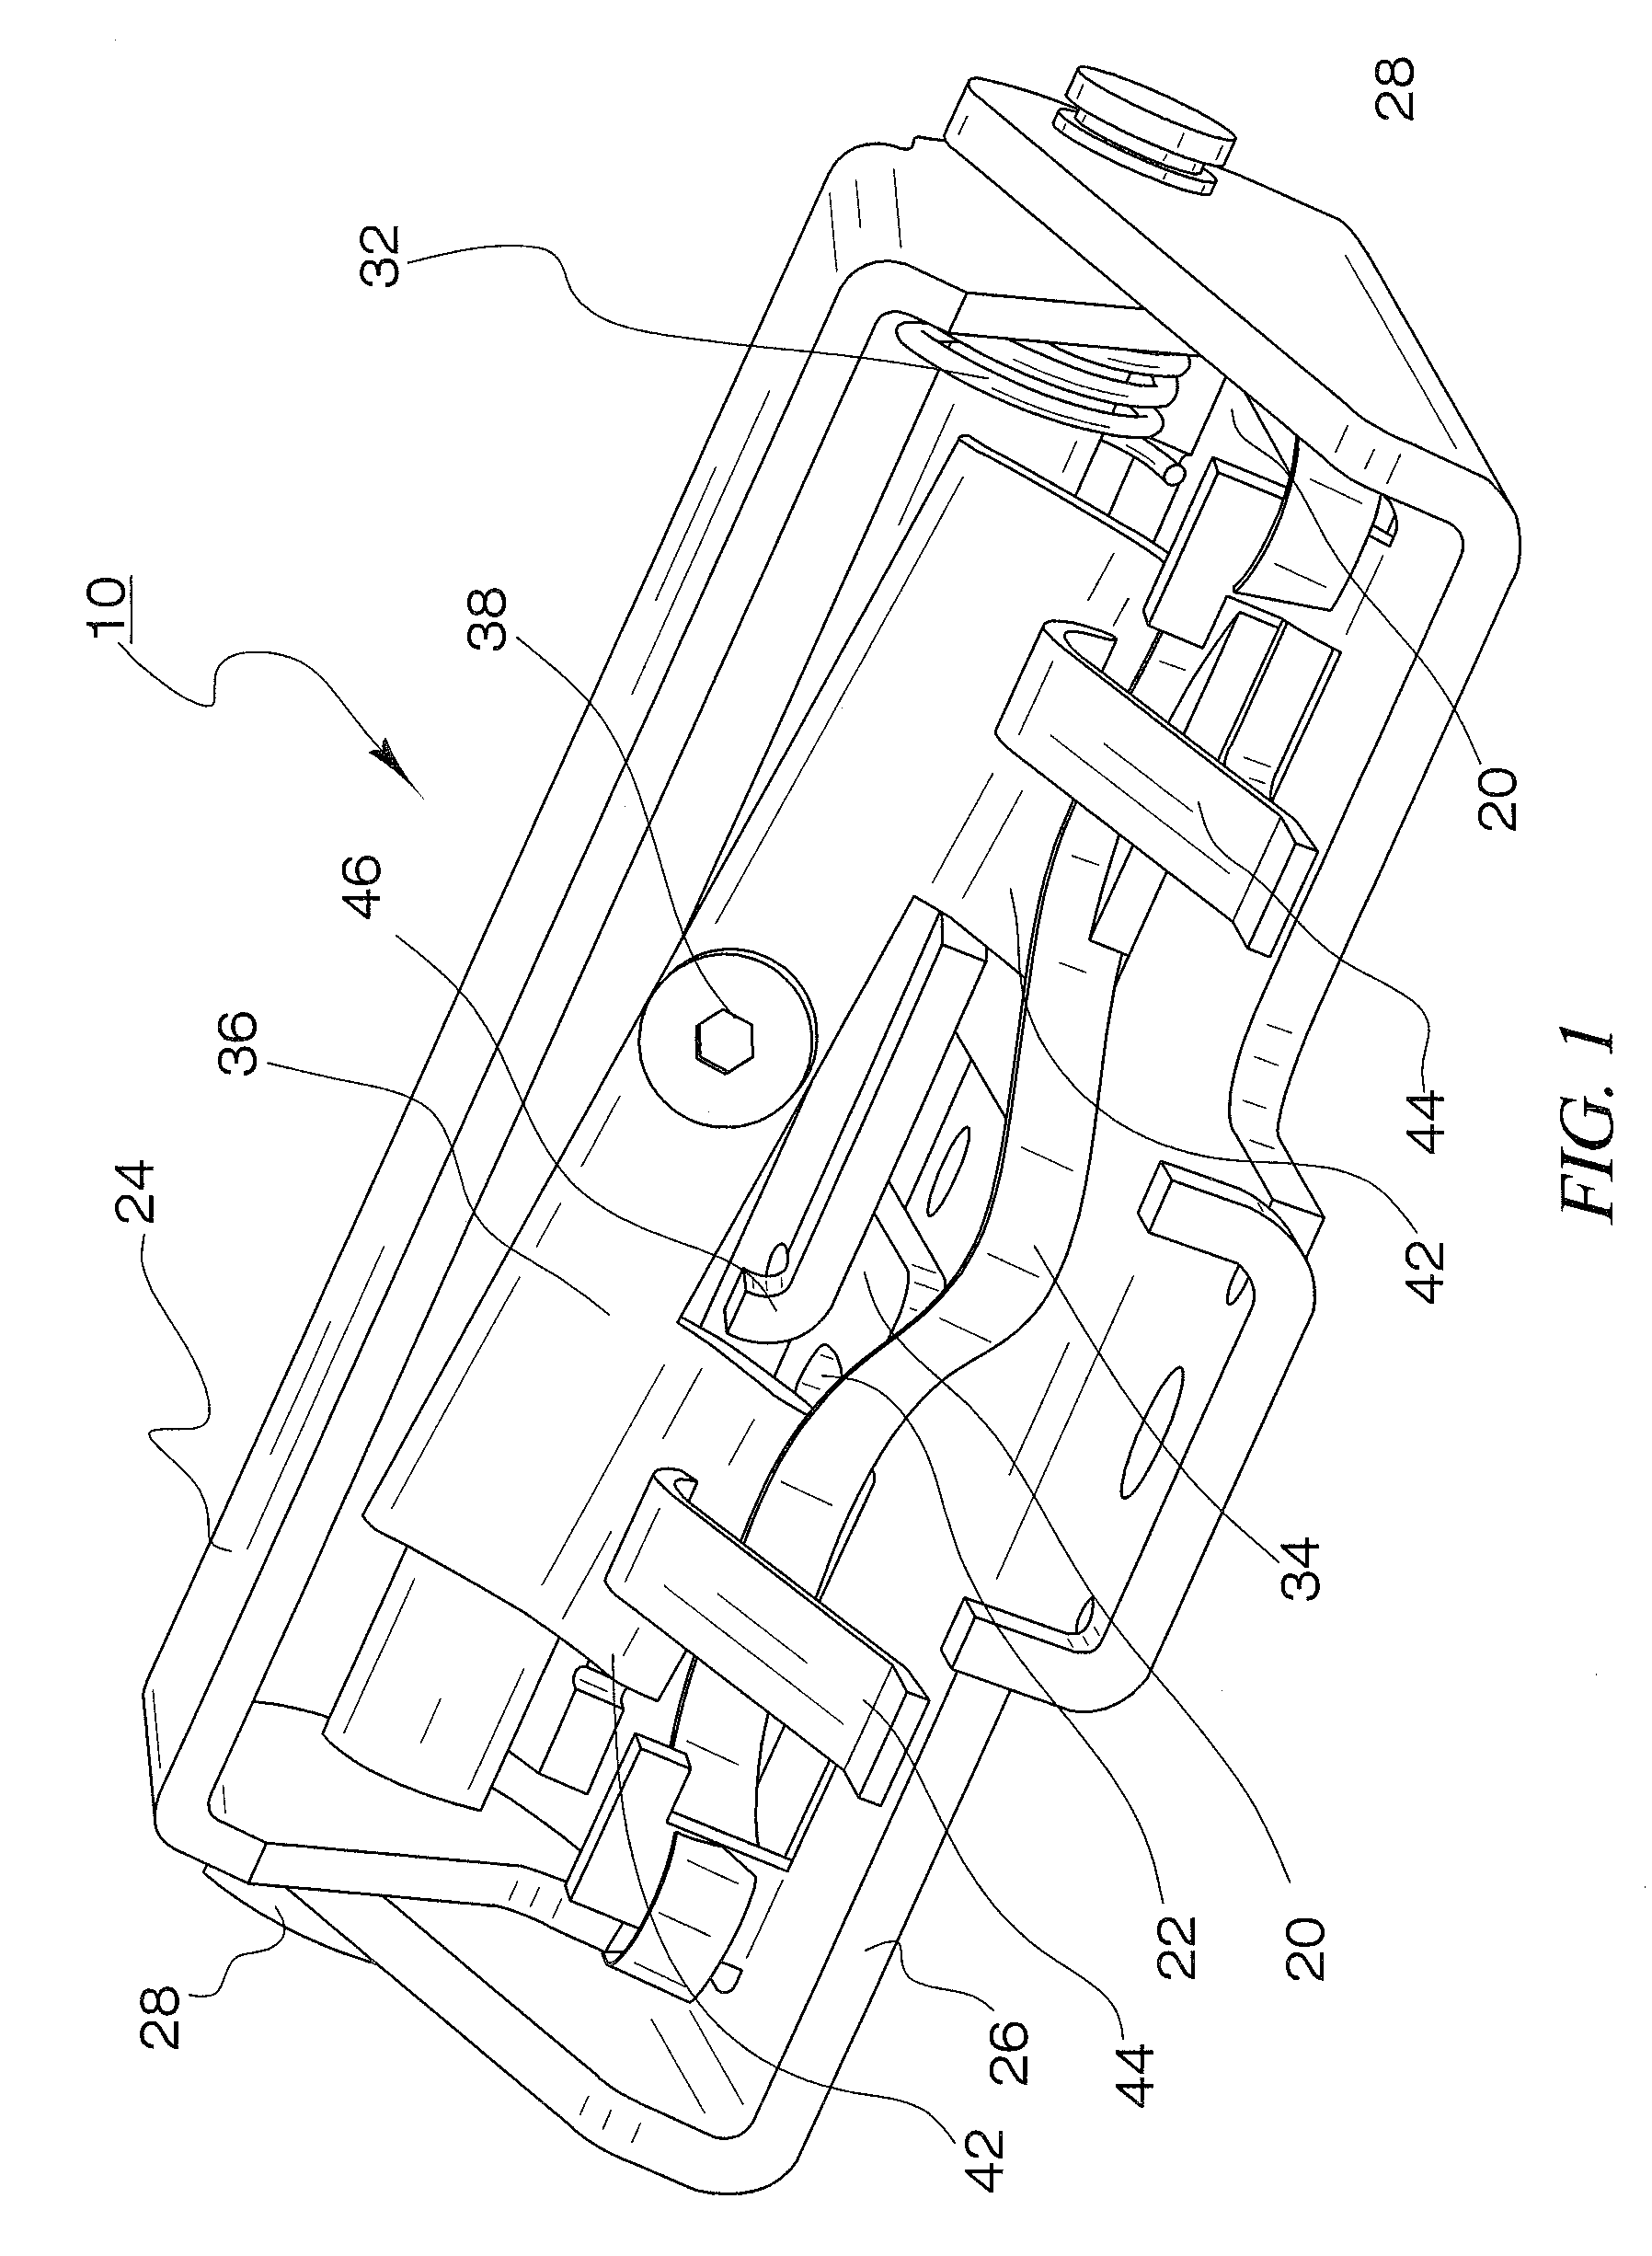 Twin buckle assembly with dual release positions